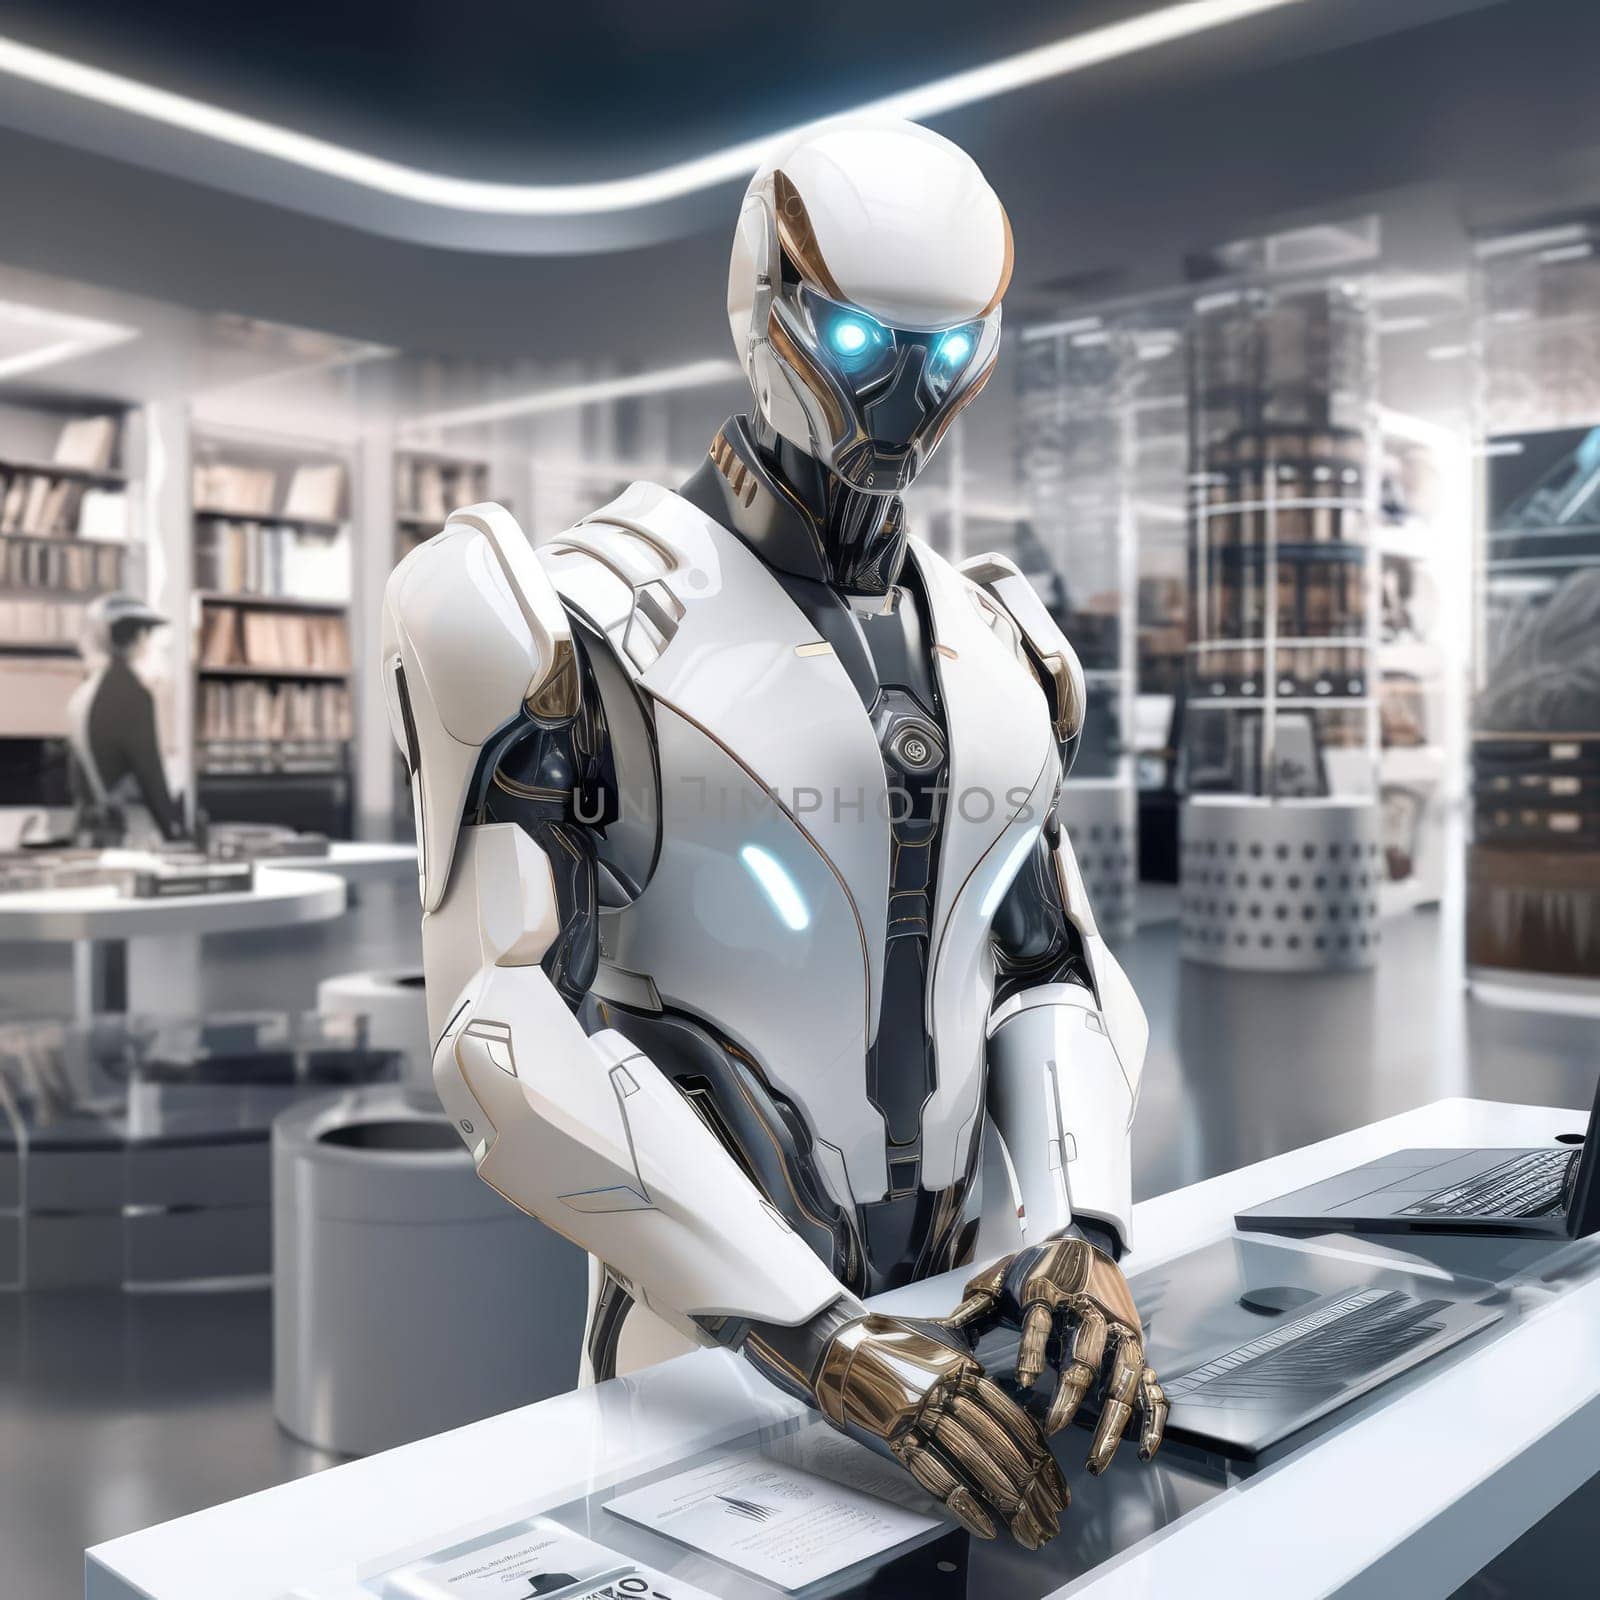 Robot consultant in the trading floor of the future